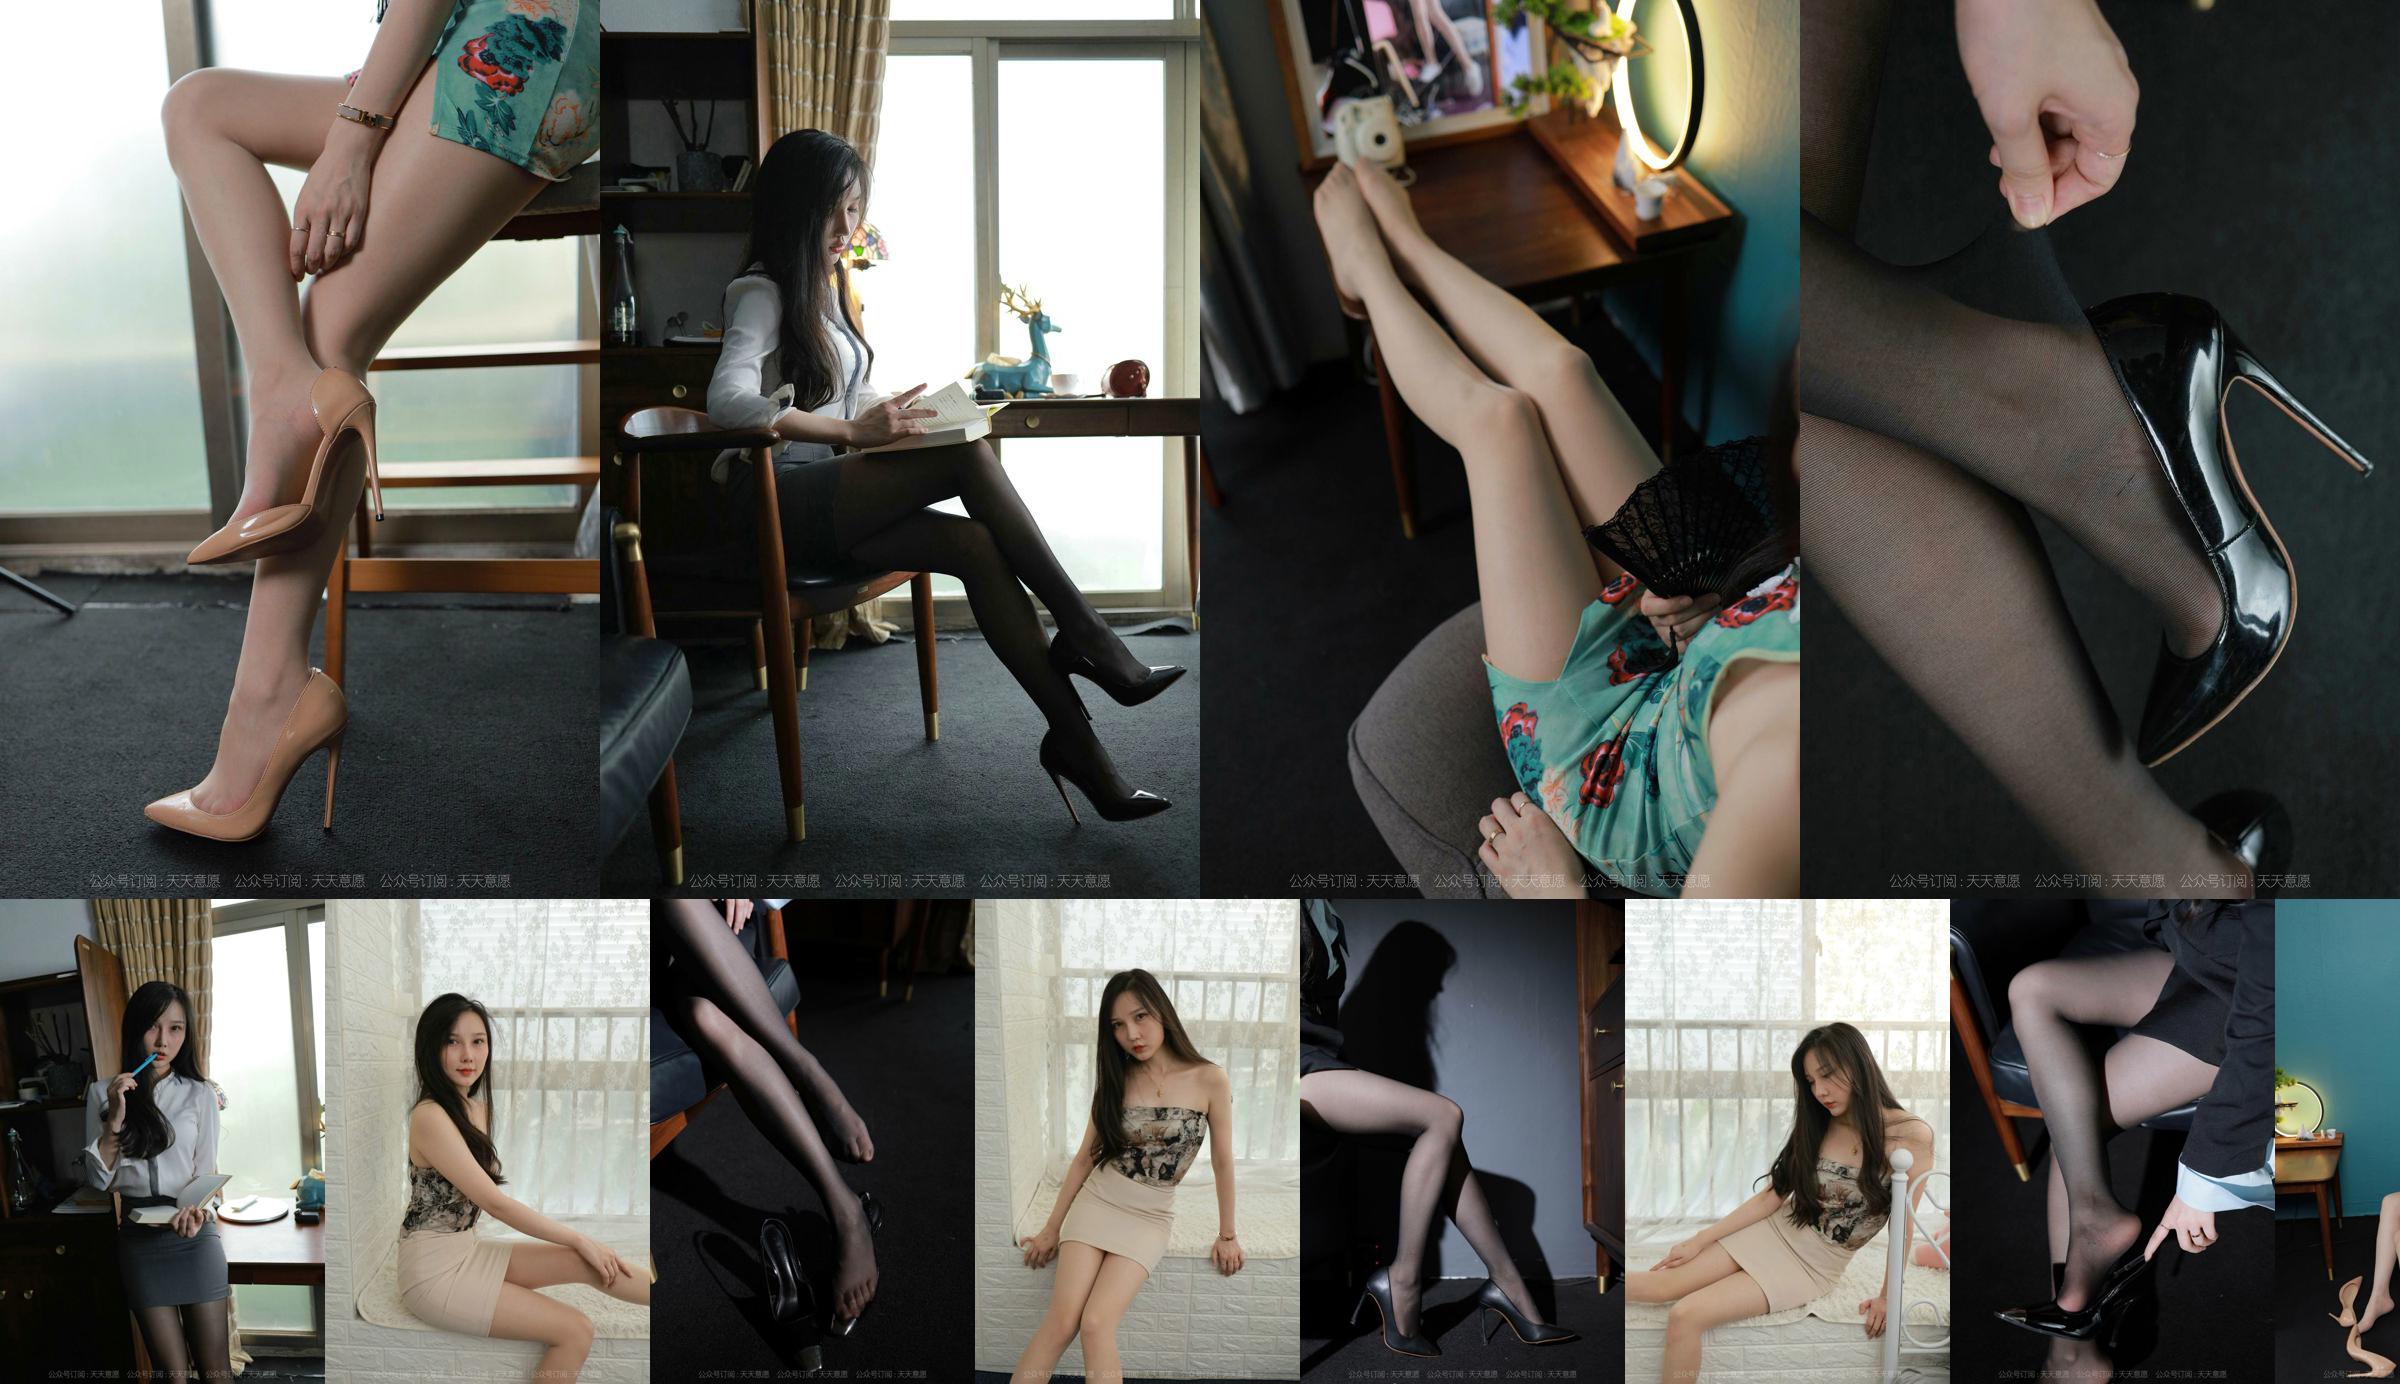 [IESS 奇思趣向] Model: Wen Xin "Sky Blue and Other Misty Rain" No.5339bc Page 47